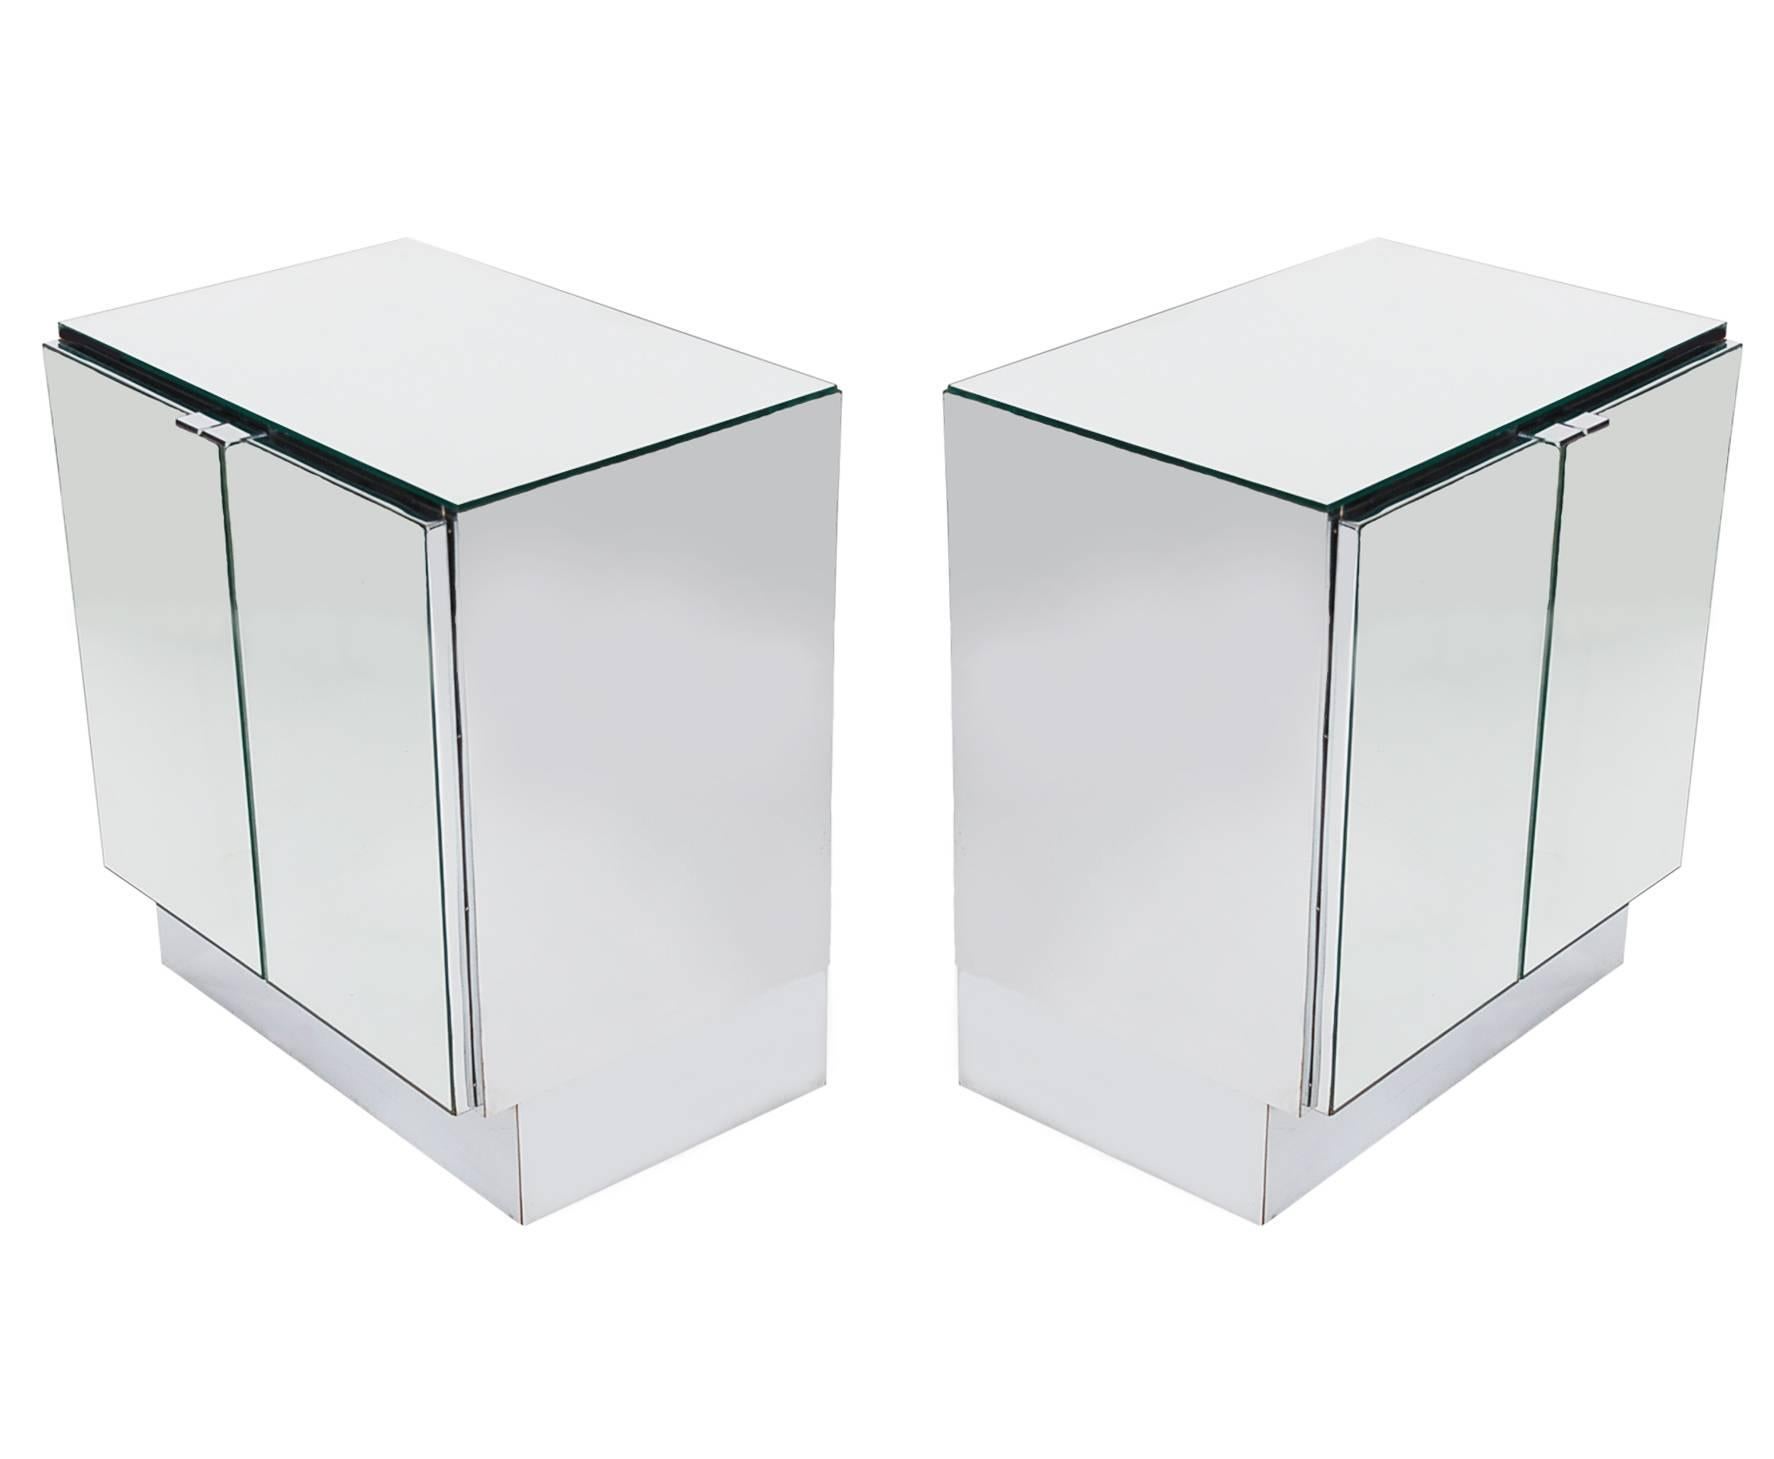 American Hollywood Regency Mirrored Cabinets, End Tables or Nightstands by Ello